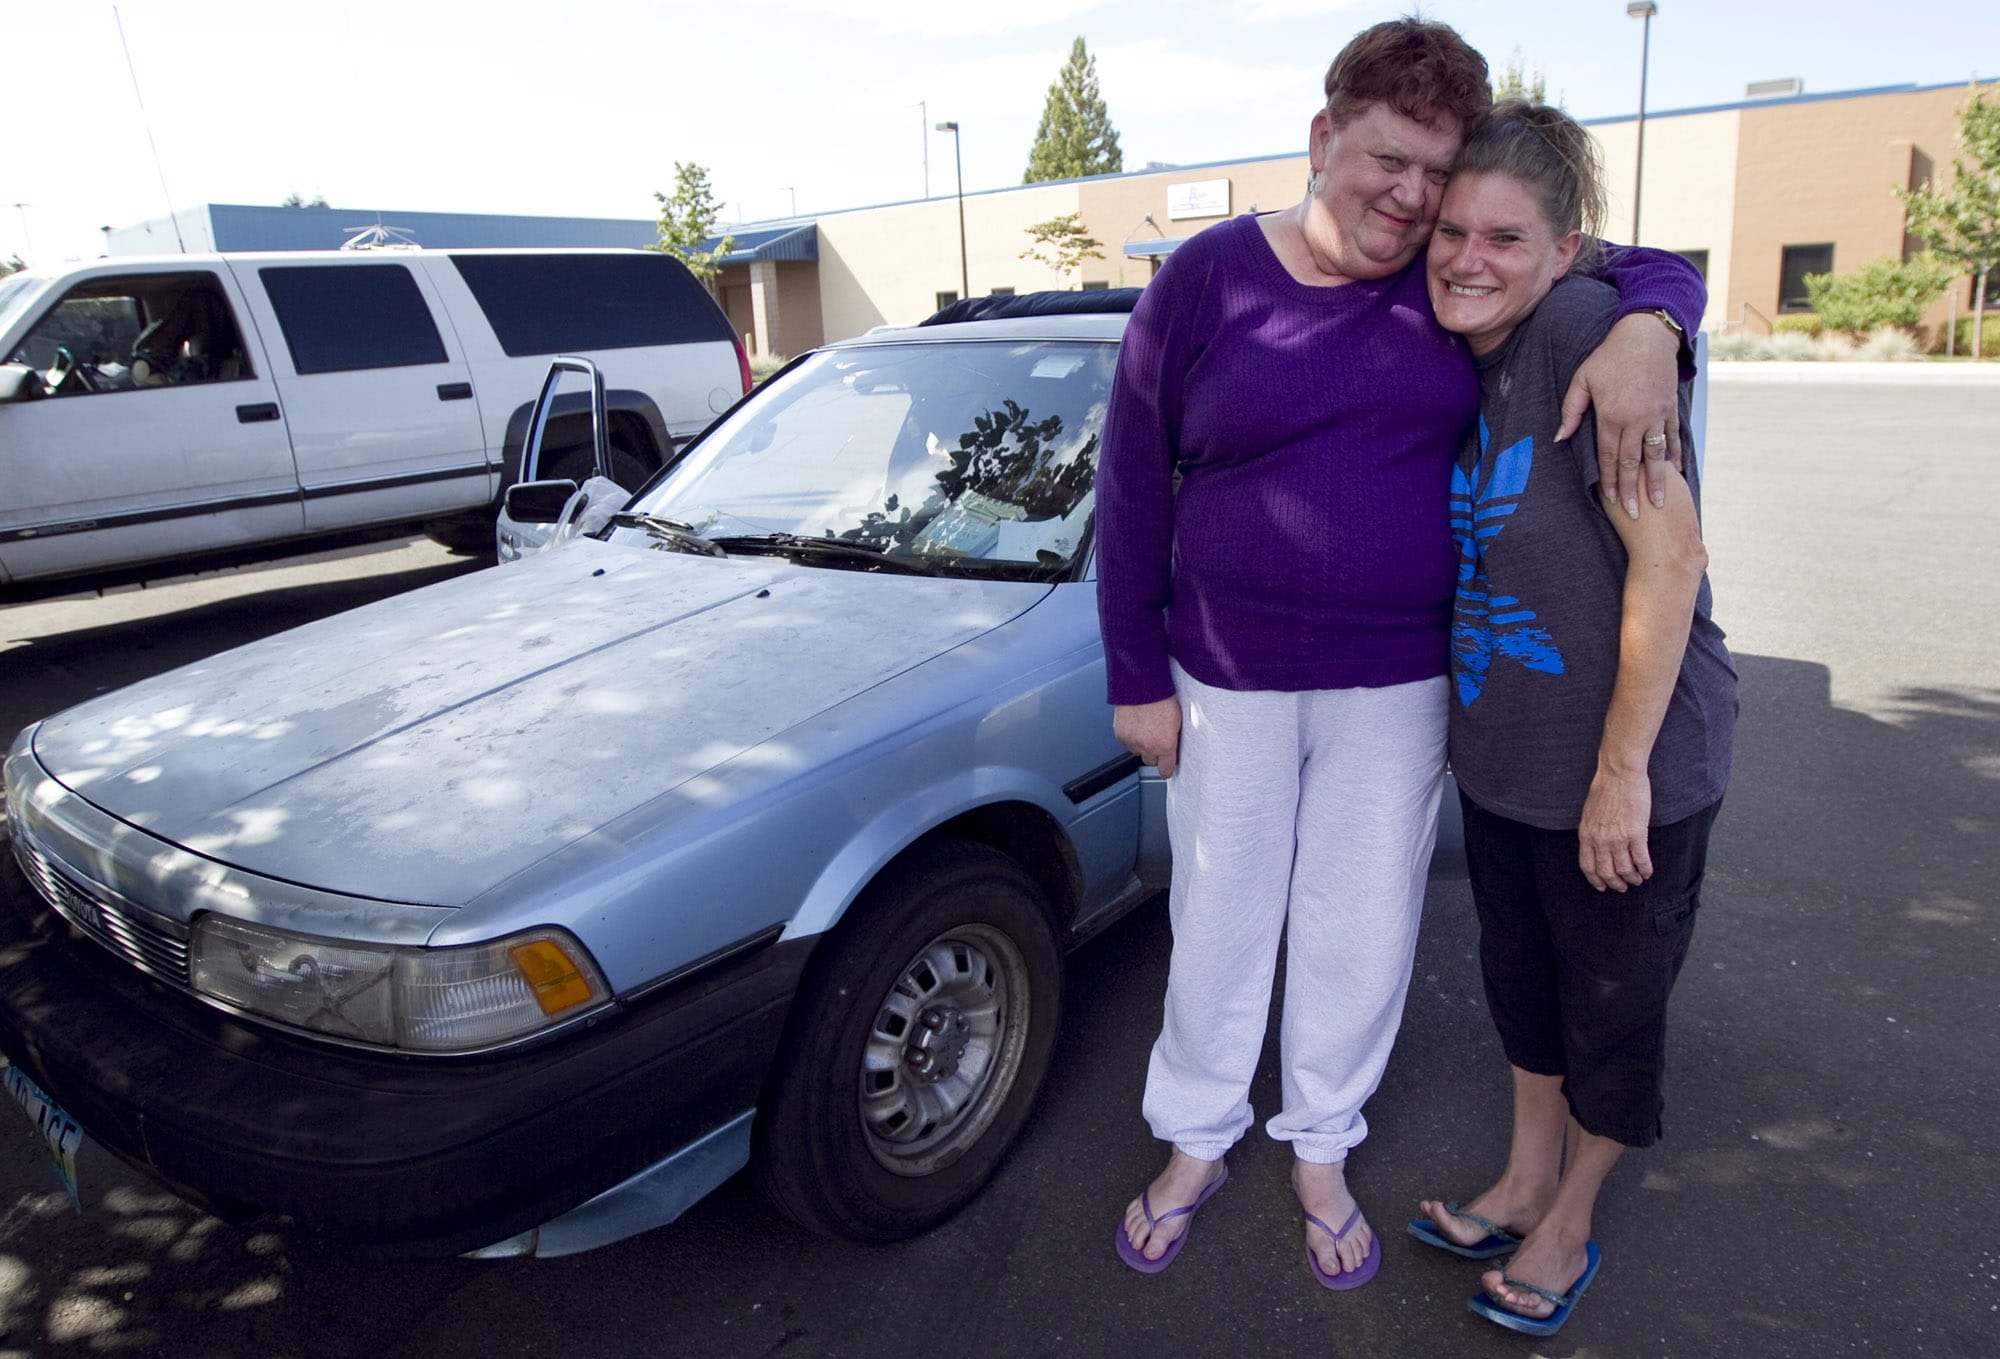 C-Tran bus driver Kerry Erving, left, gives a squeeze to Amanda Snapp, whom she discovered living in her car in the shared parking lot of Share and the Council for the Homeless.